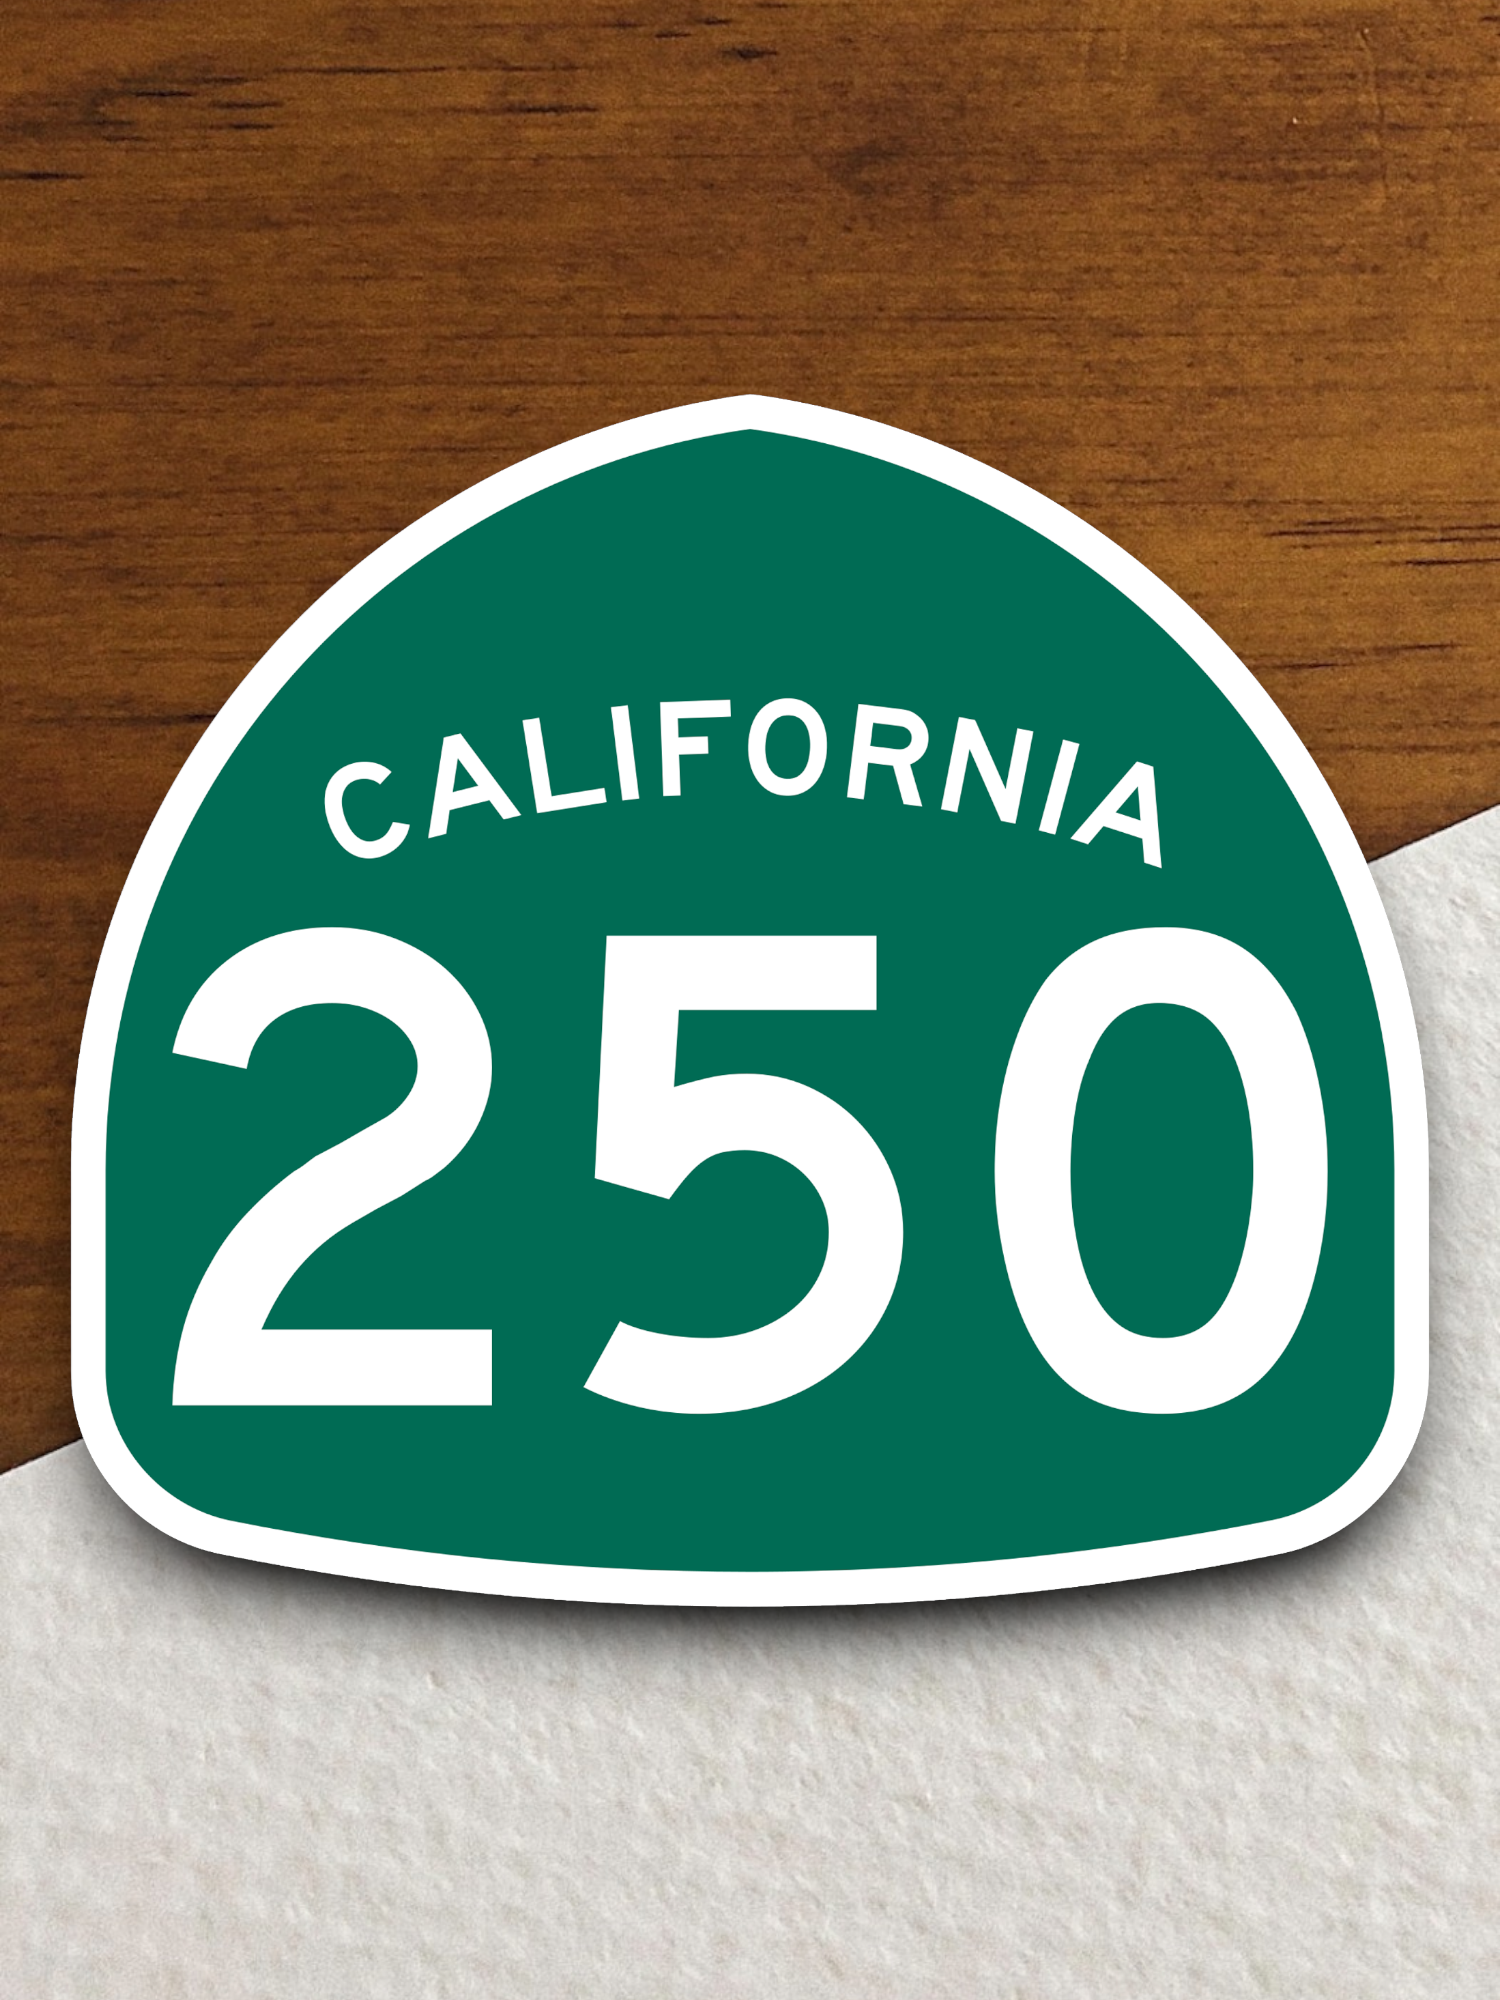 California State Route 250 Road Sign Sticker